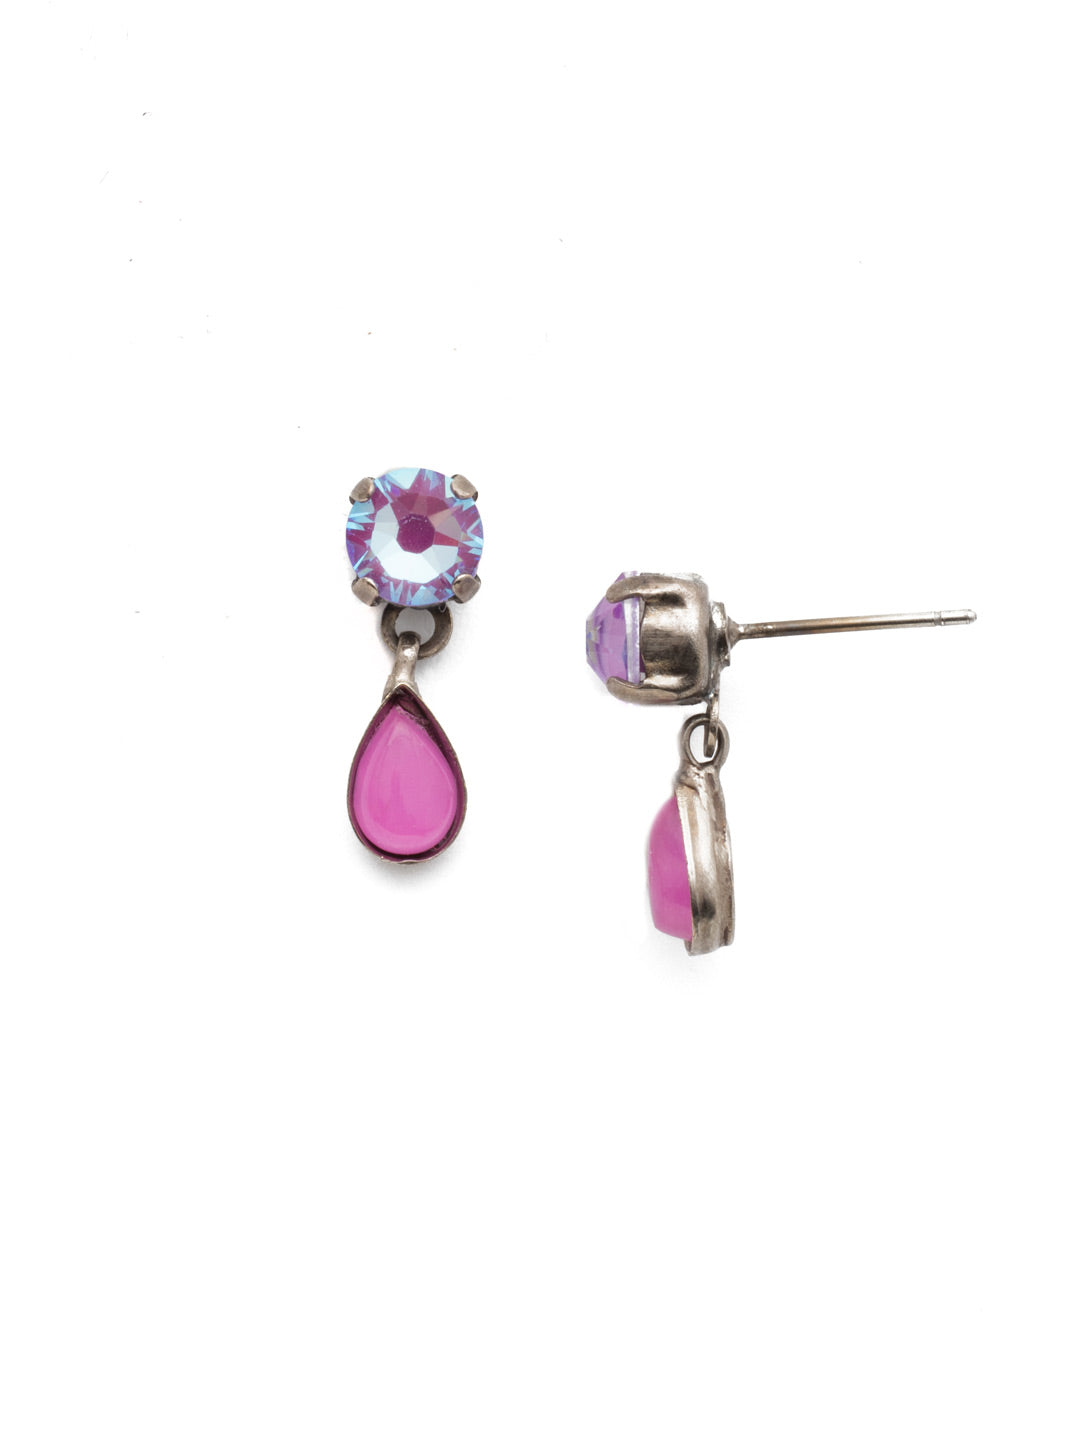 Quincey Dangle Earrings - EET160ASETP - The Quincey Dangle Earrings are simply sophisticated. The signature round crystal posts are taken up a notch when they drip a pear-shaped stone. From Sorrelli's Electric Pink collection in our Antique Silver-tone finish.